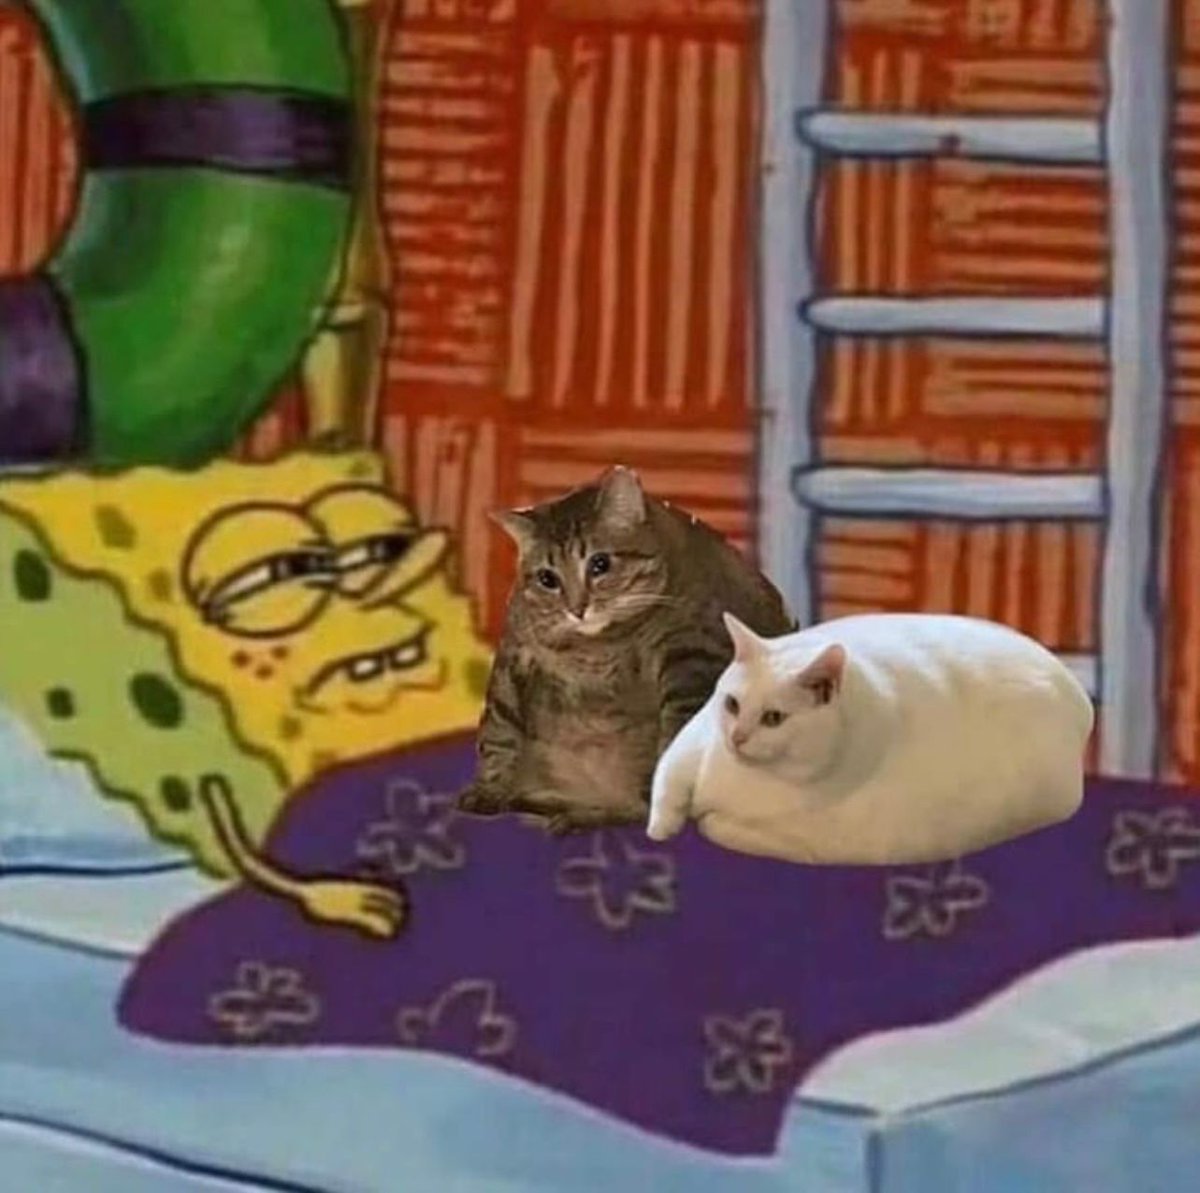 me trying to sleep while my cats take up the whole bed